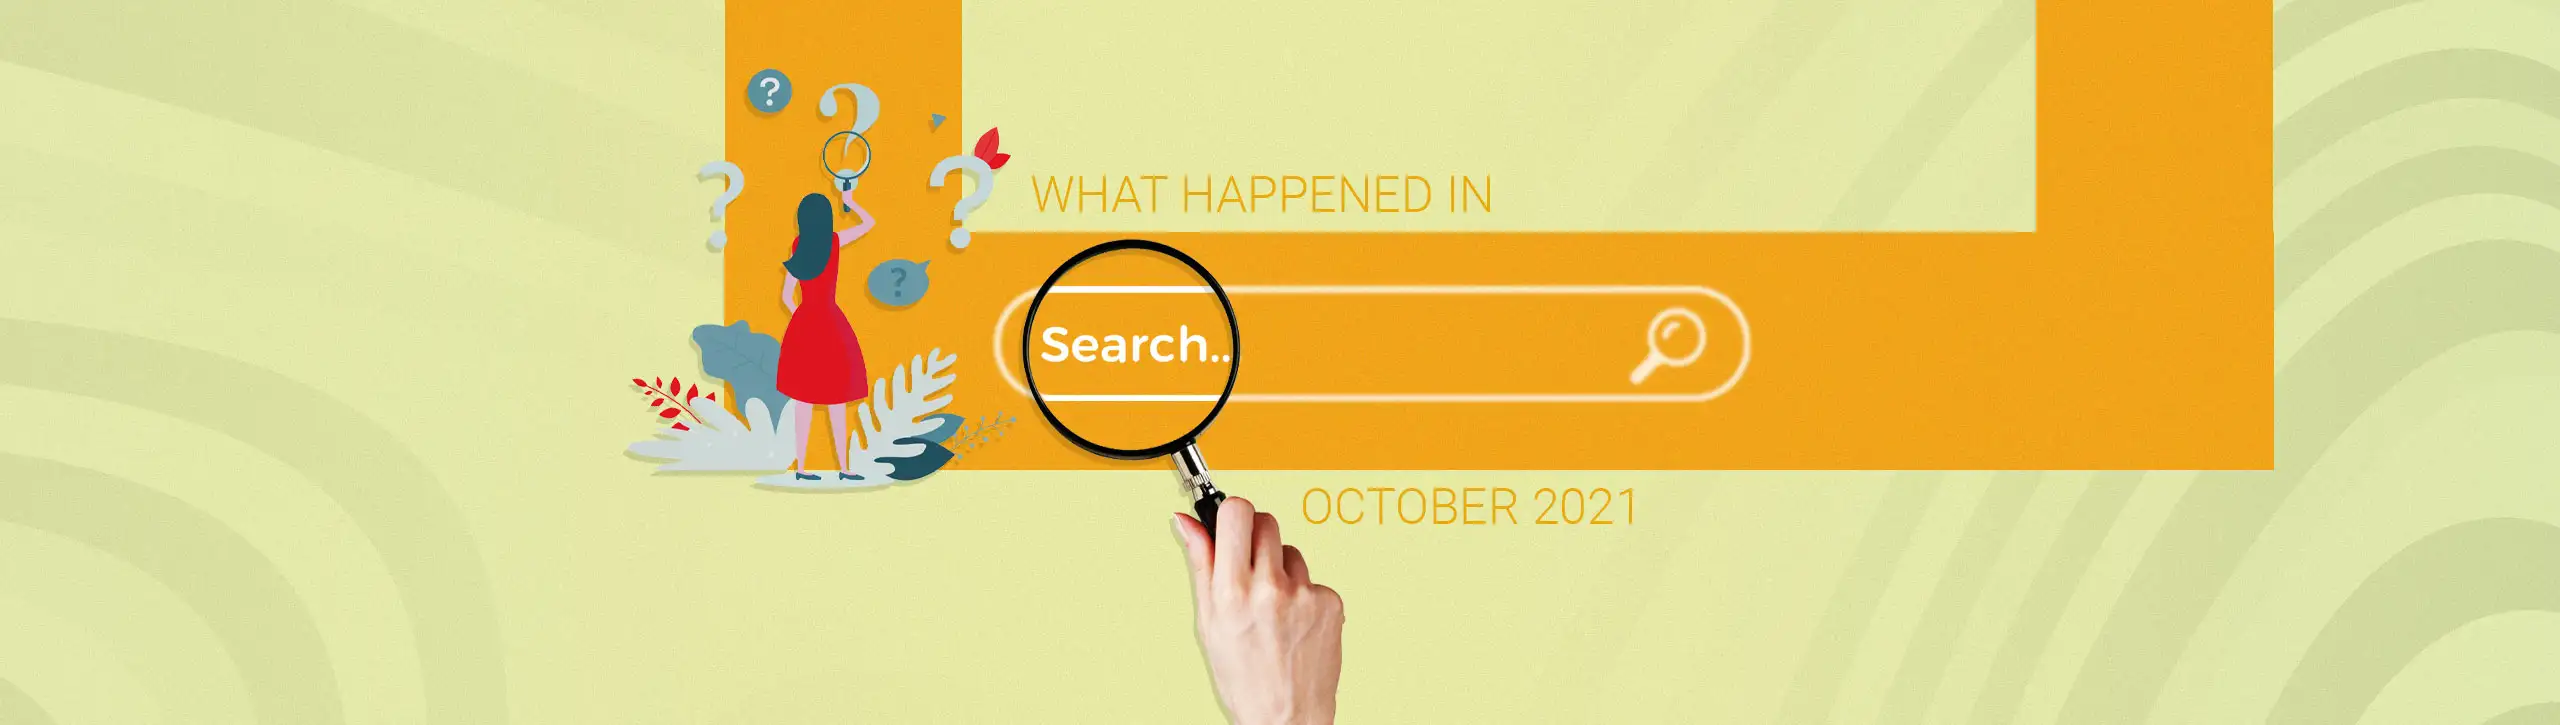 Google Search Updates – October ’21 Changes